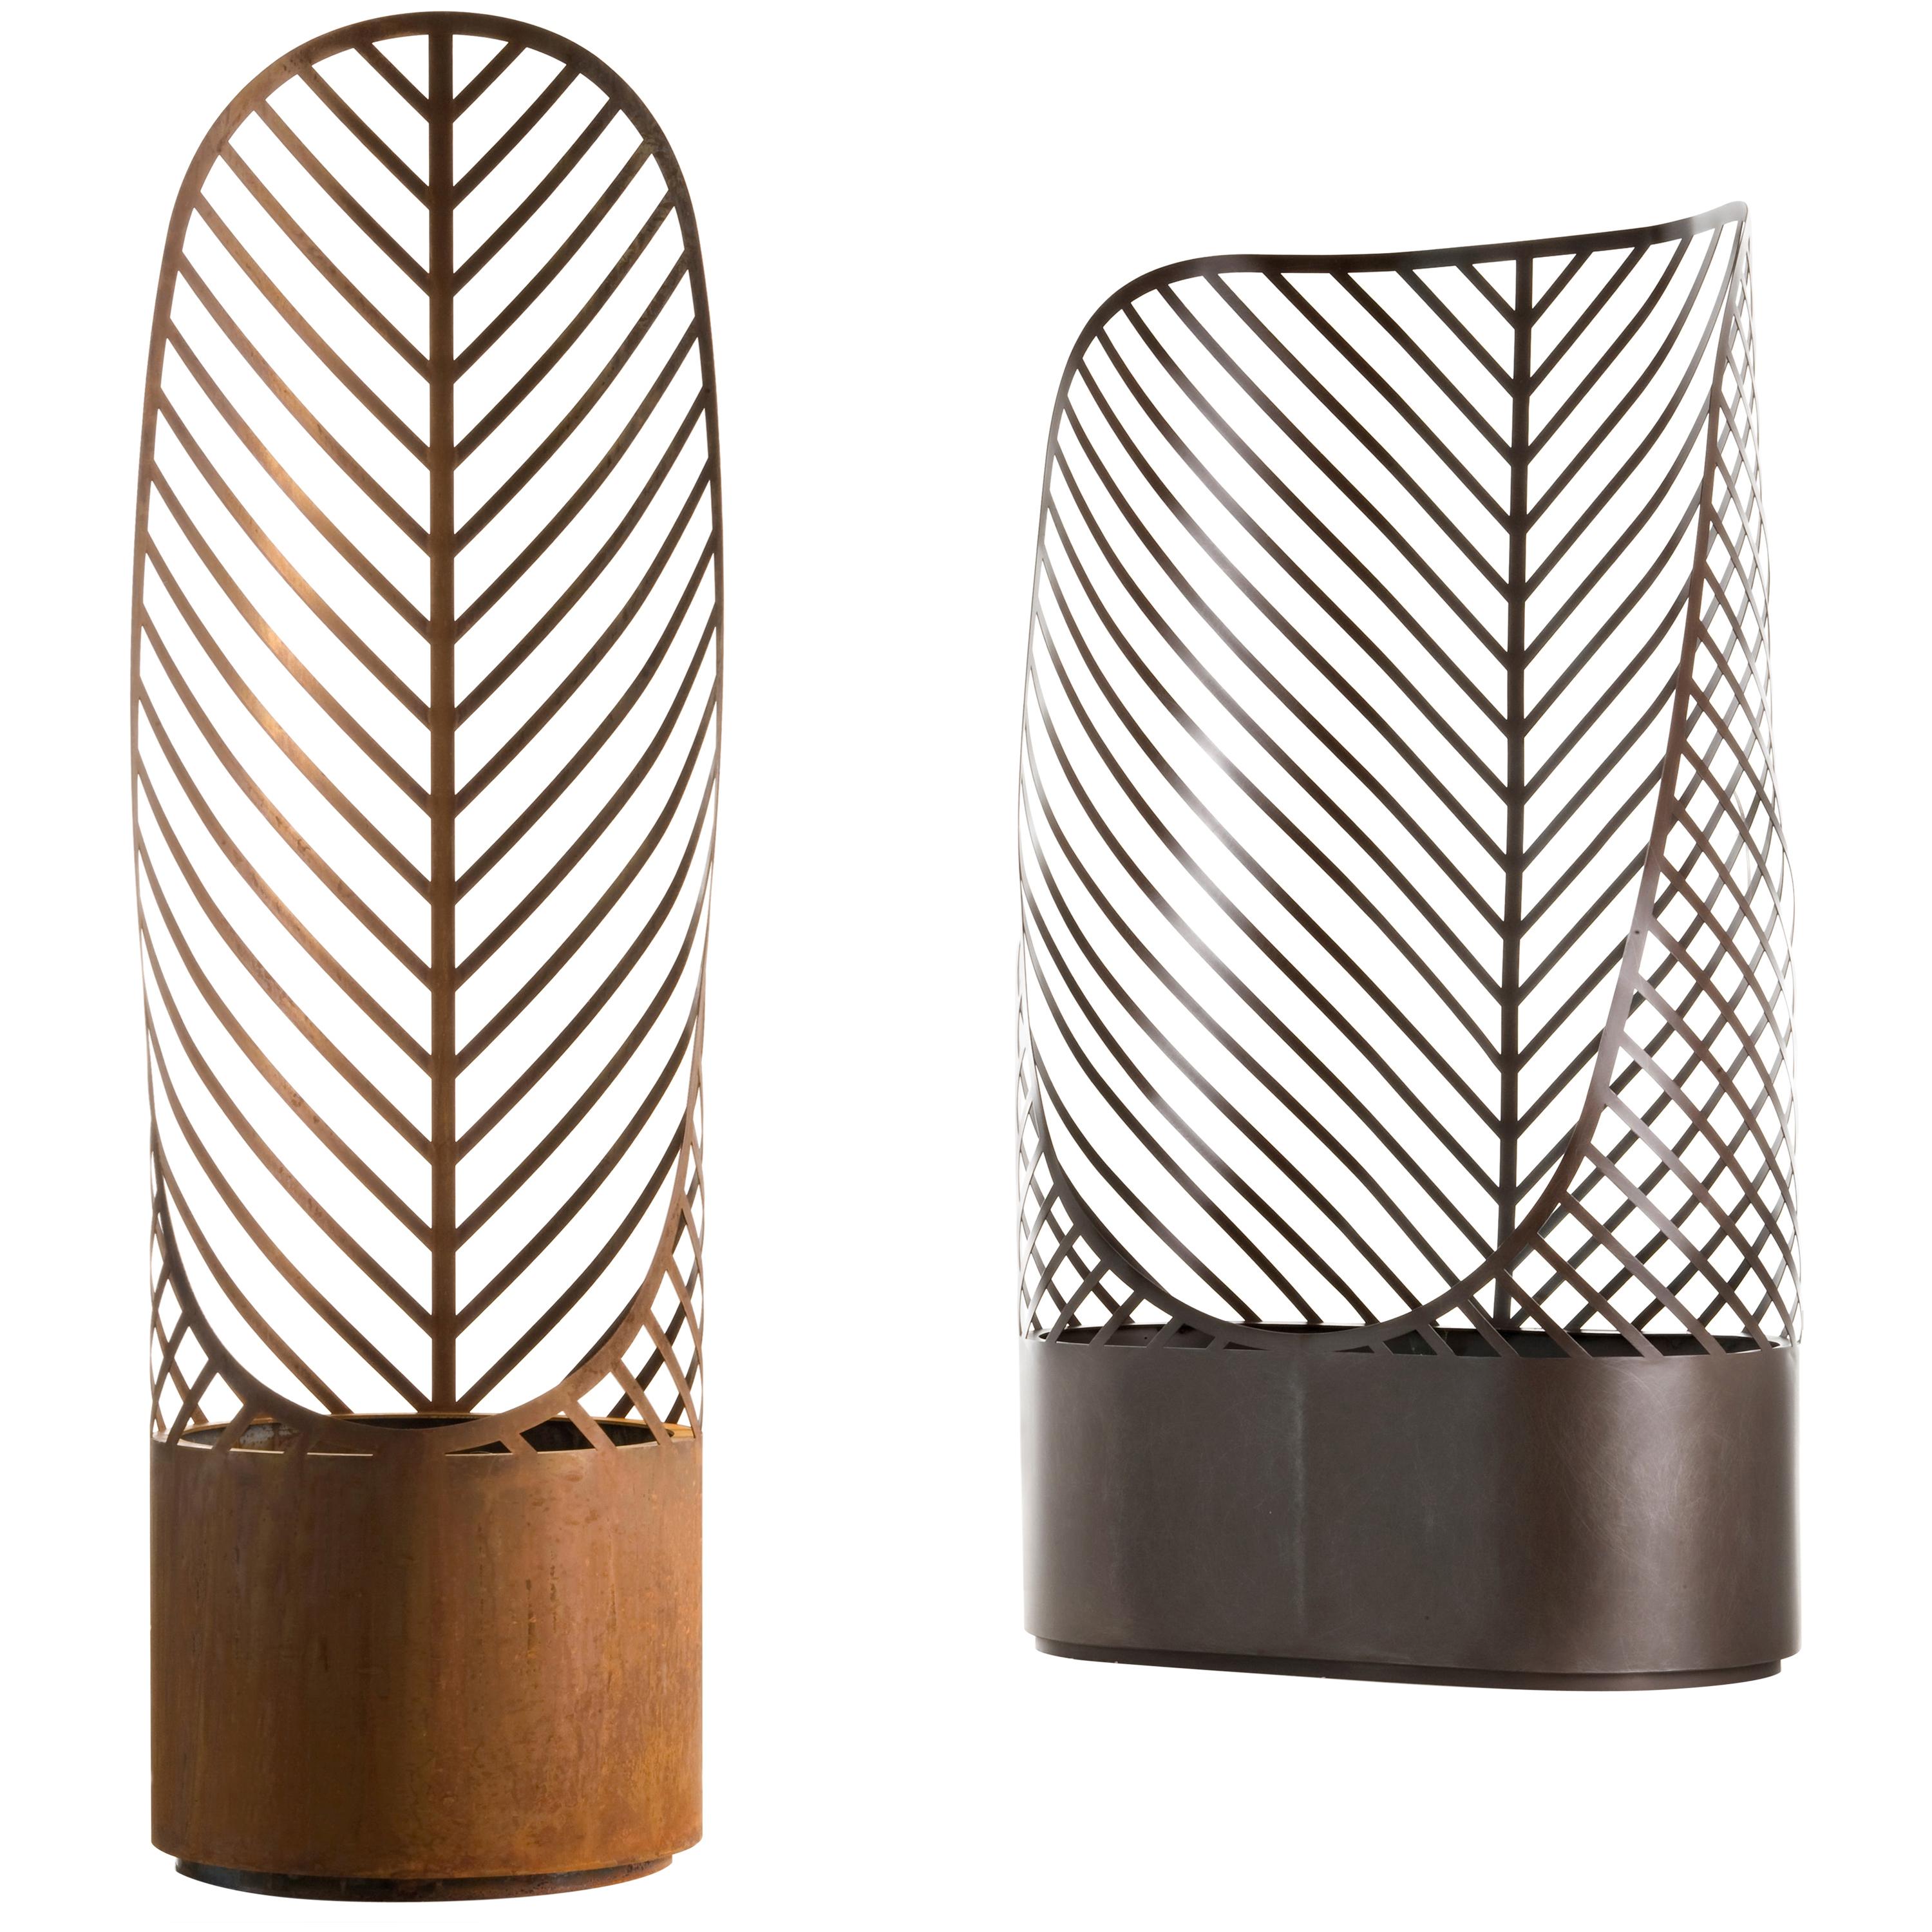 DeCastelli Screen-Pot 2 Planter in Bronzed Stainless Steel by Francois Clerc